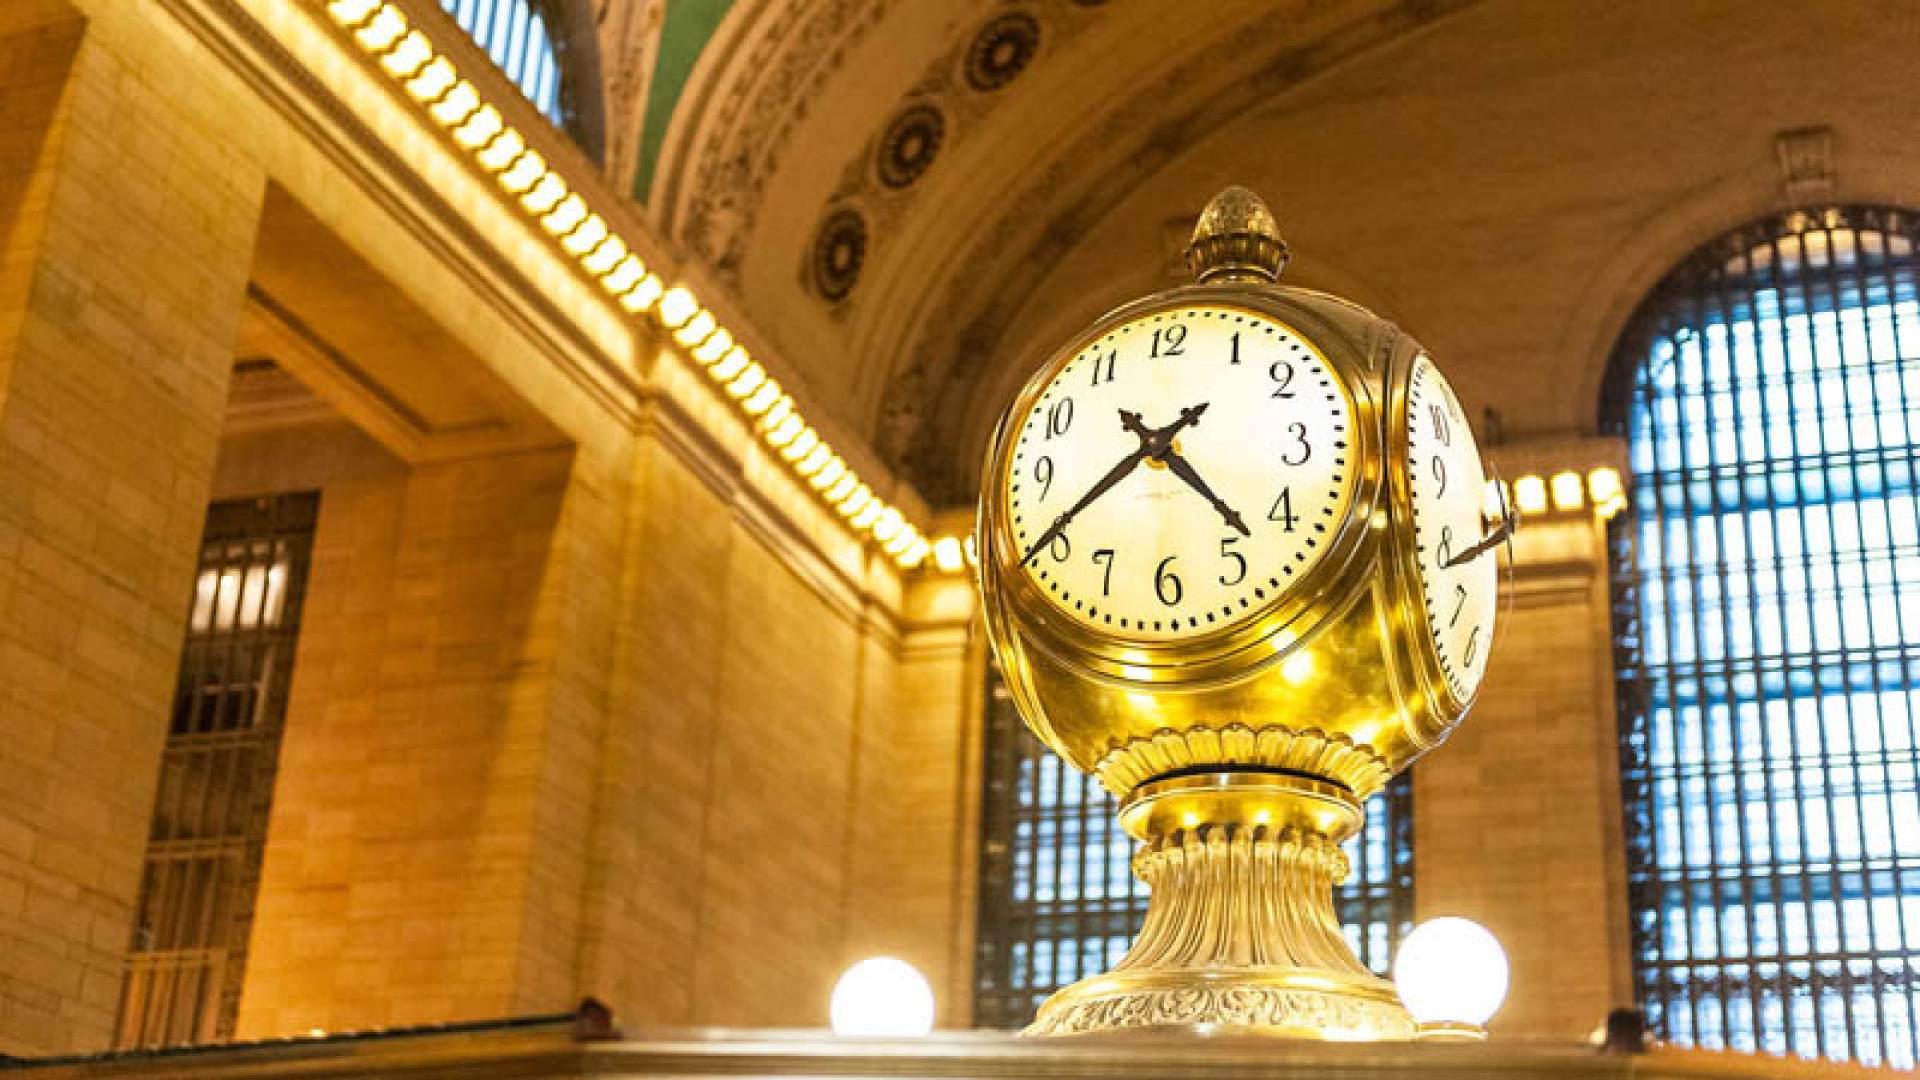 GRAND CENTRAL TERMINAL, Second Part